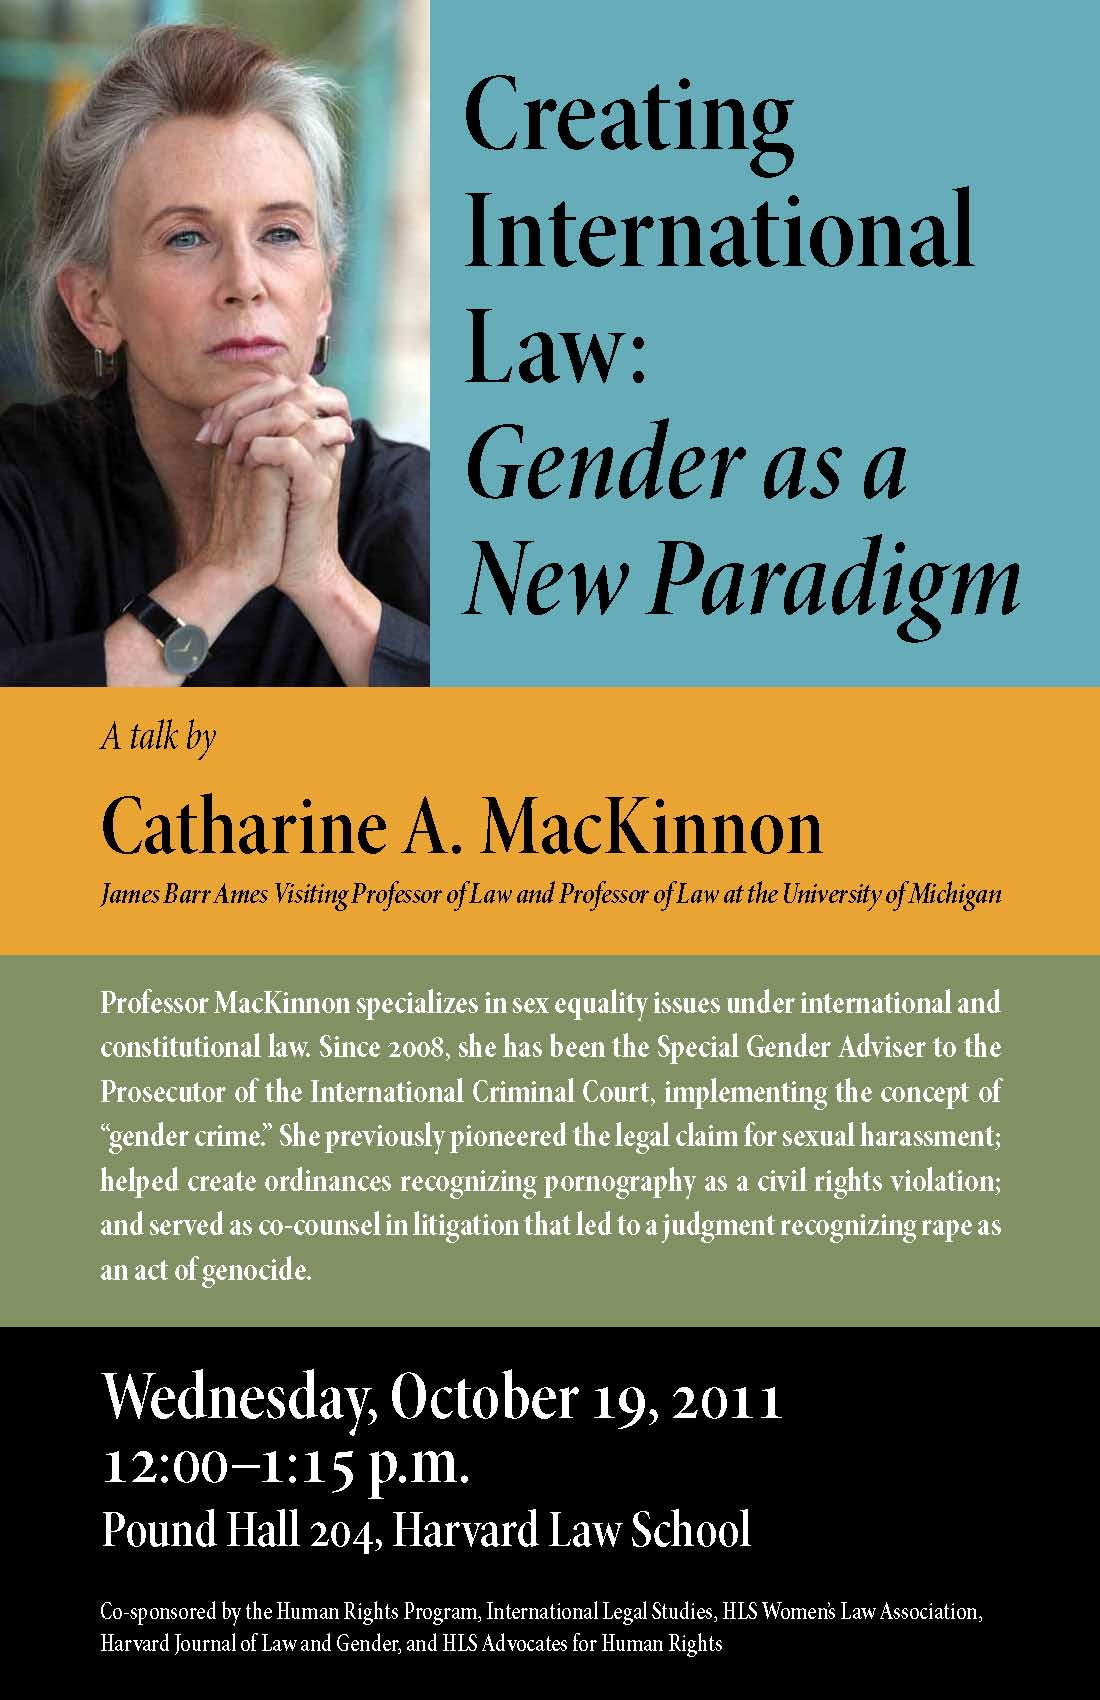 Catharine A MacKinnon with hands interlocked next to "Creating International Law: Gender as a New Paradigm"